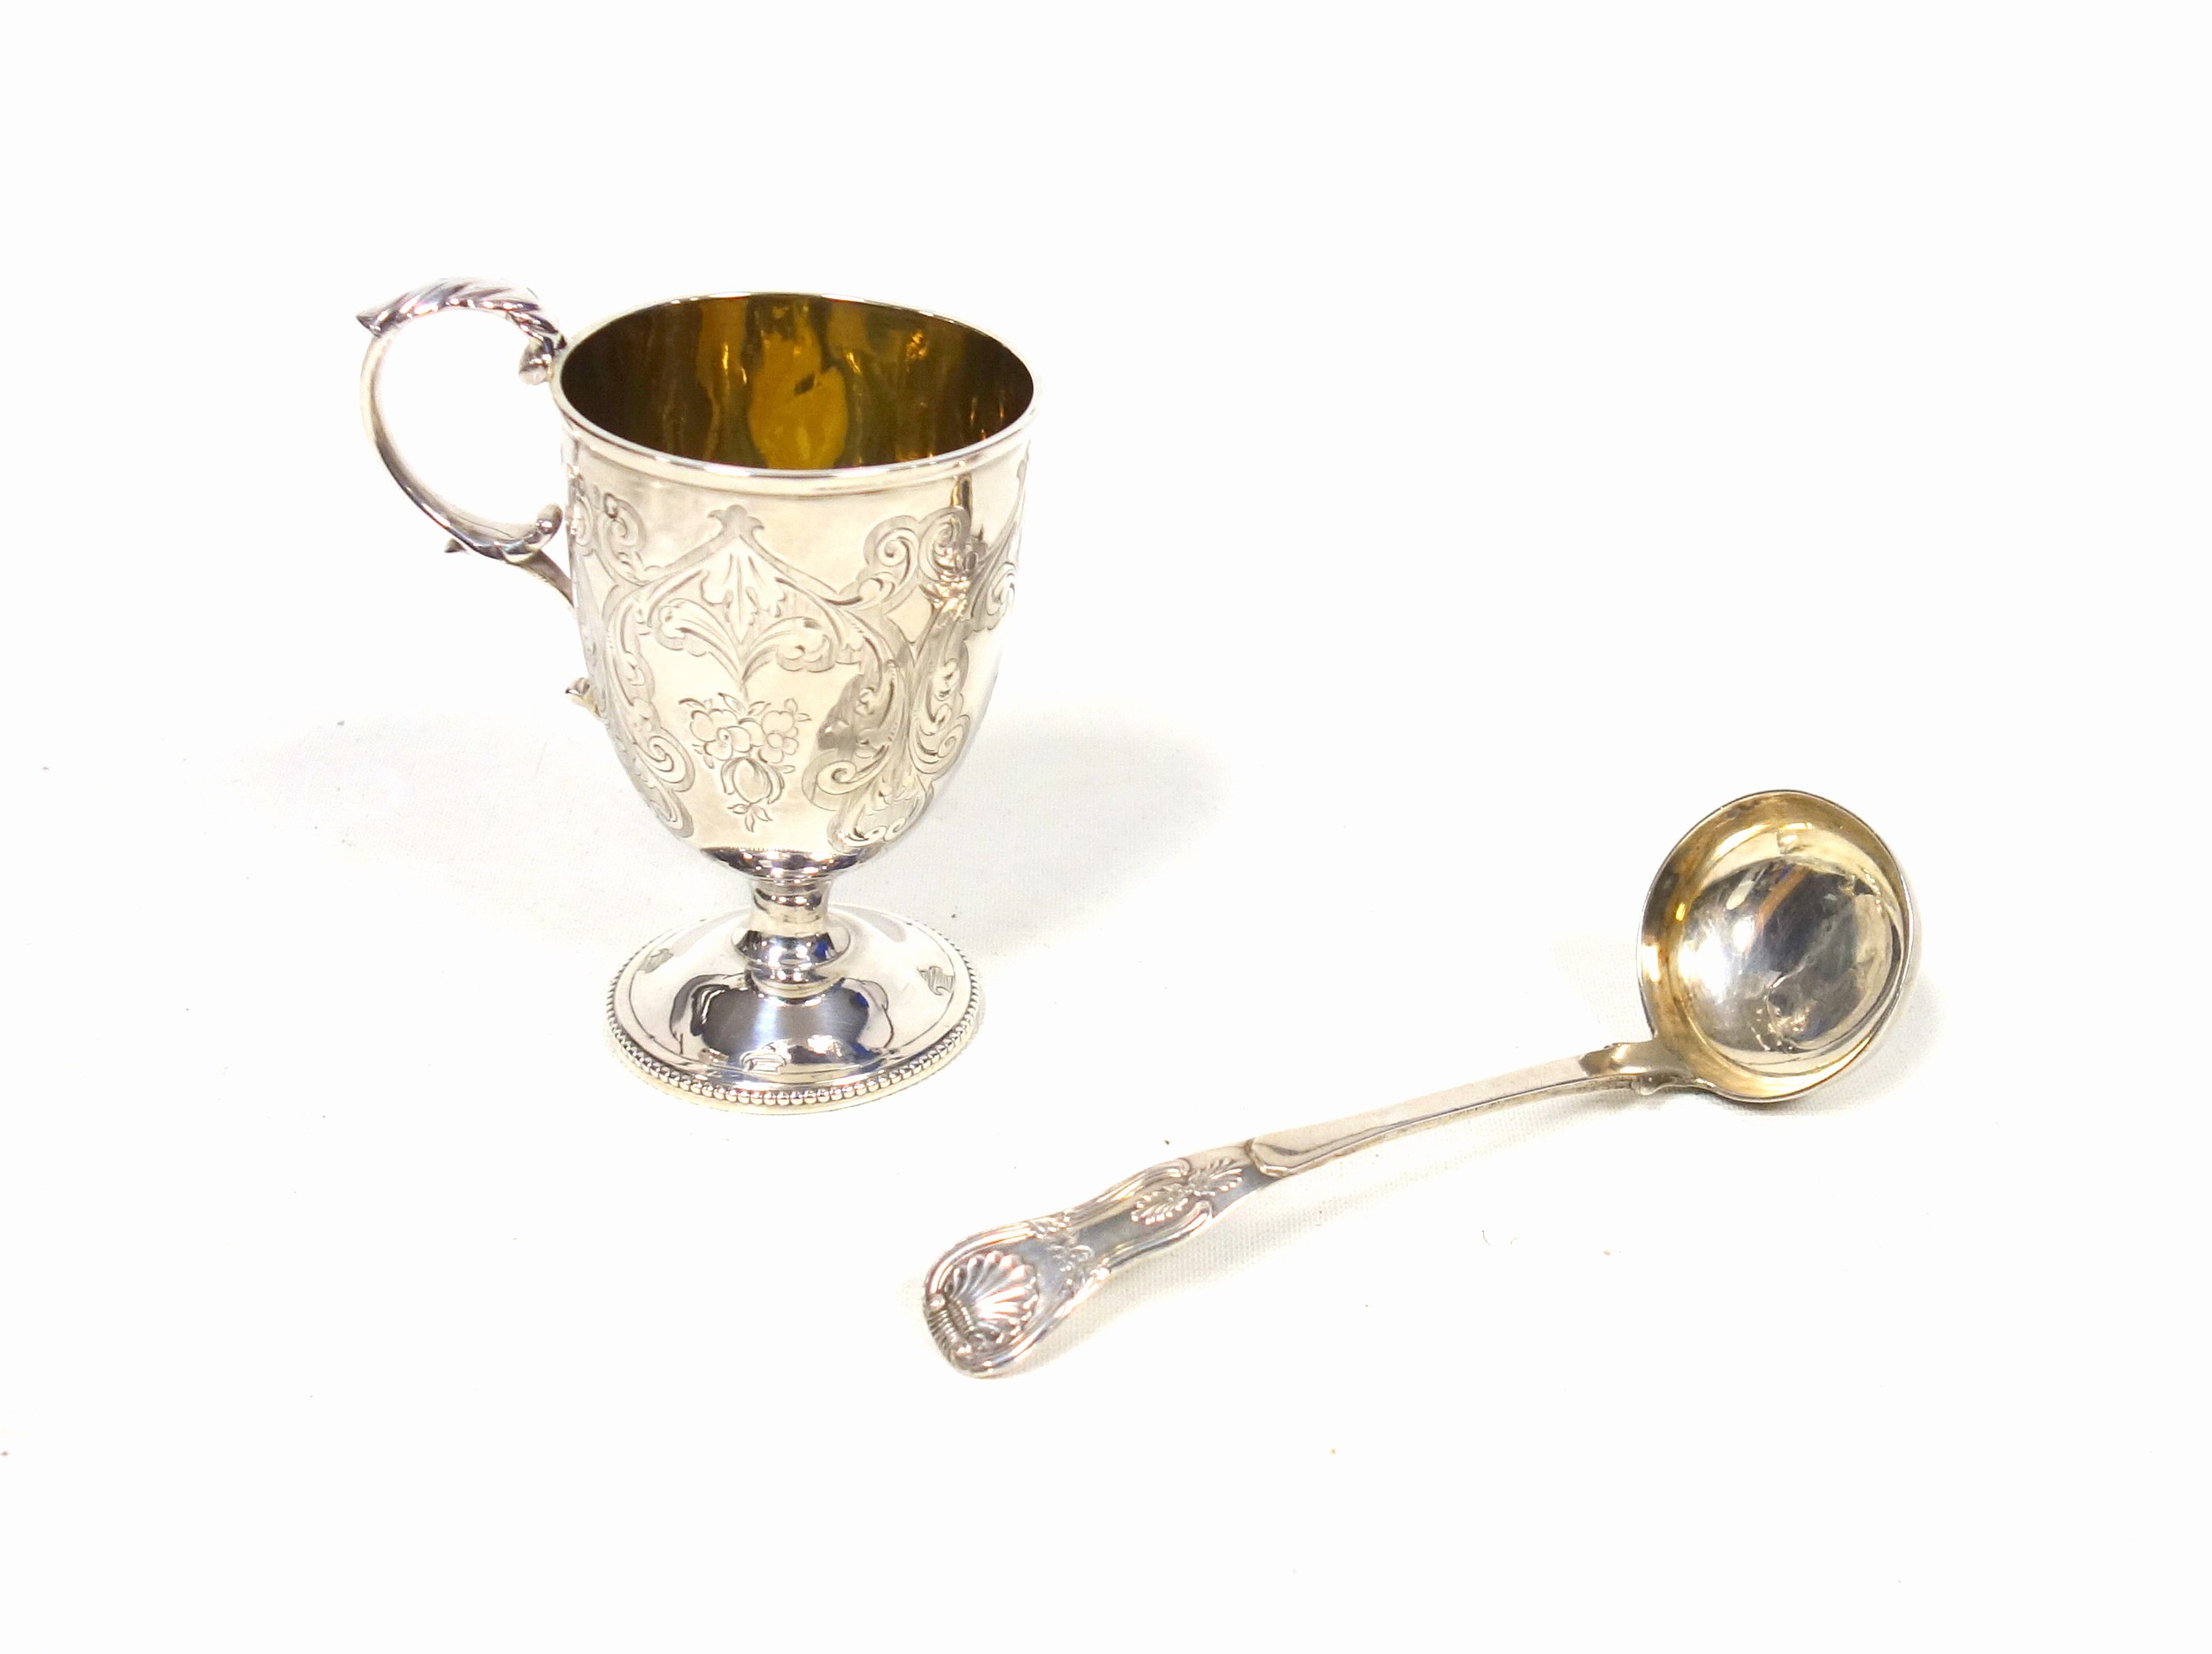 Victorian silver pedestal christening mug with all-over chased floral decoration initialled "N",